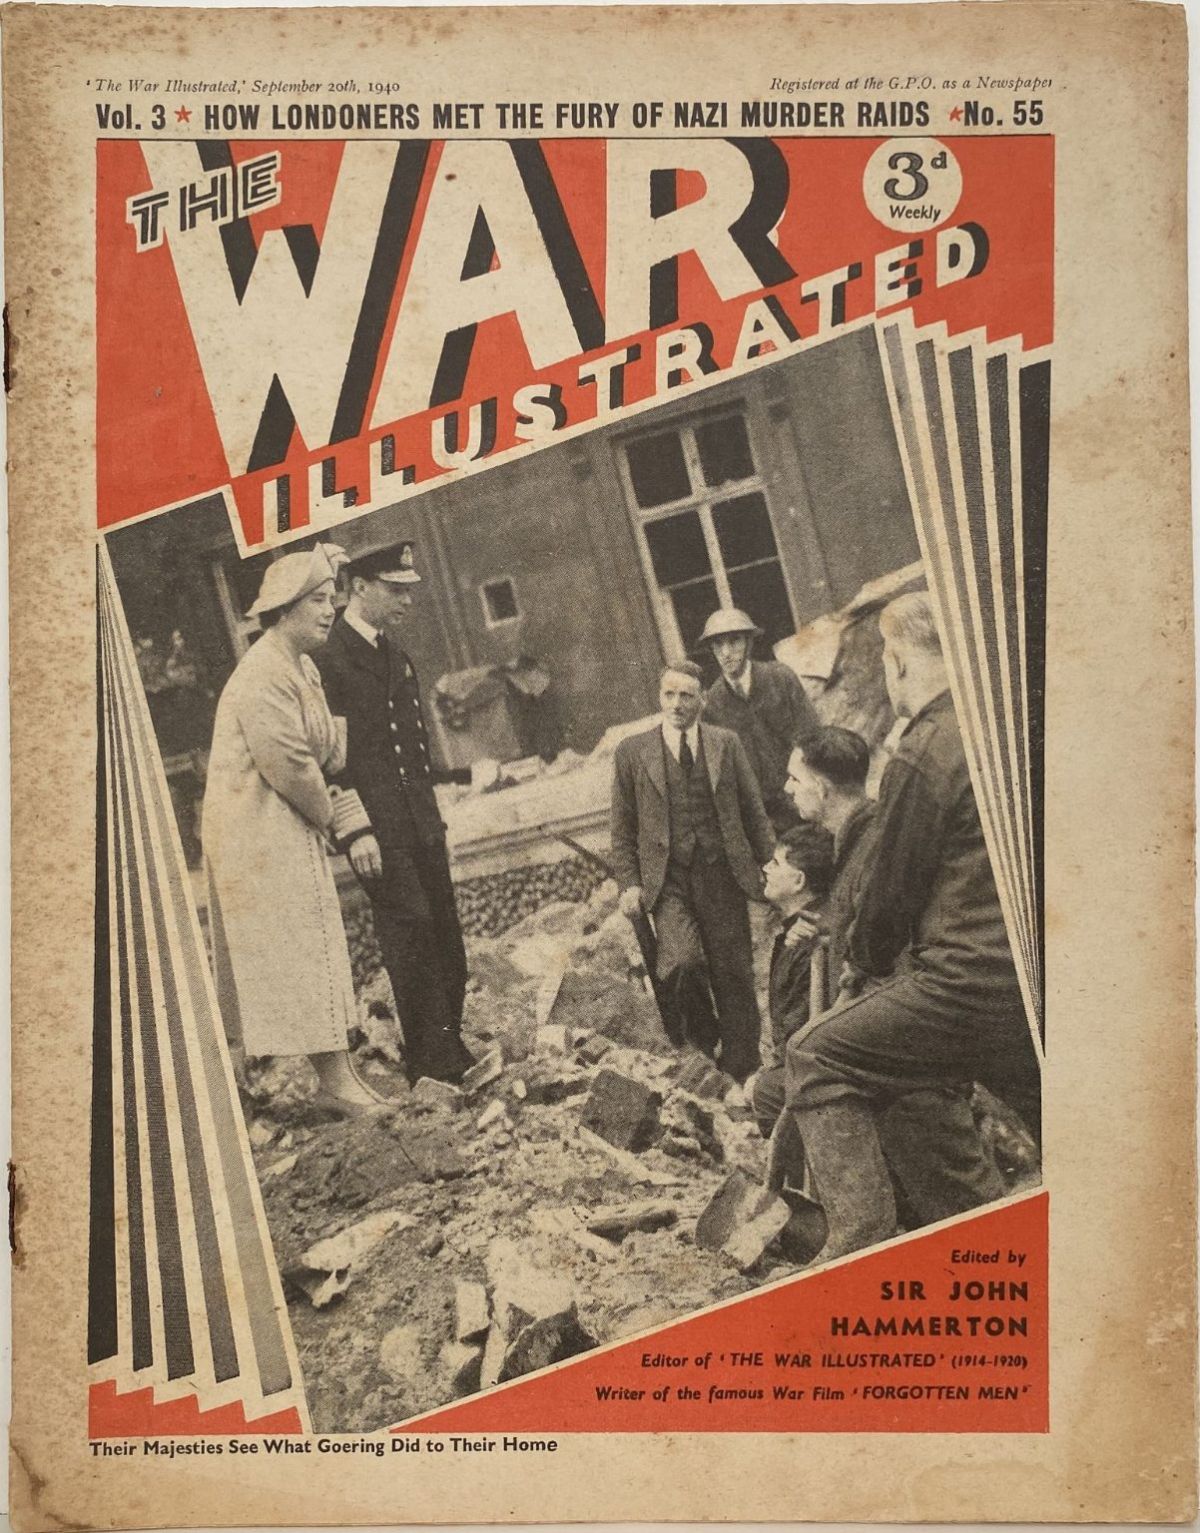 THE WAR ILLUSTRATED - Vol 3, No 55, 20th Sept 1940